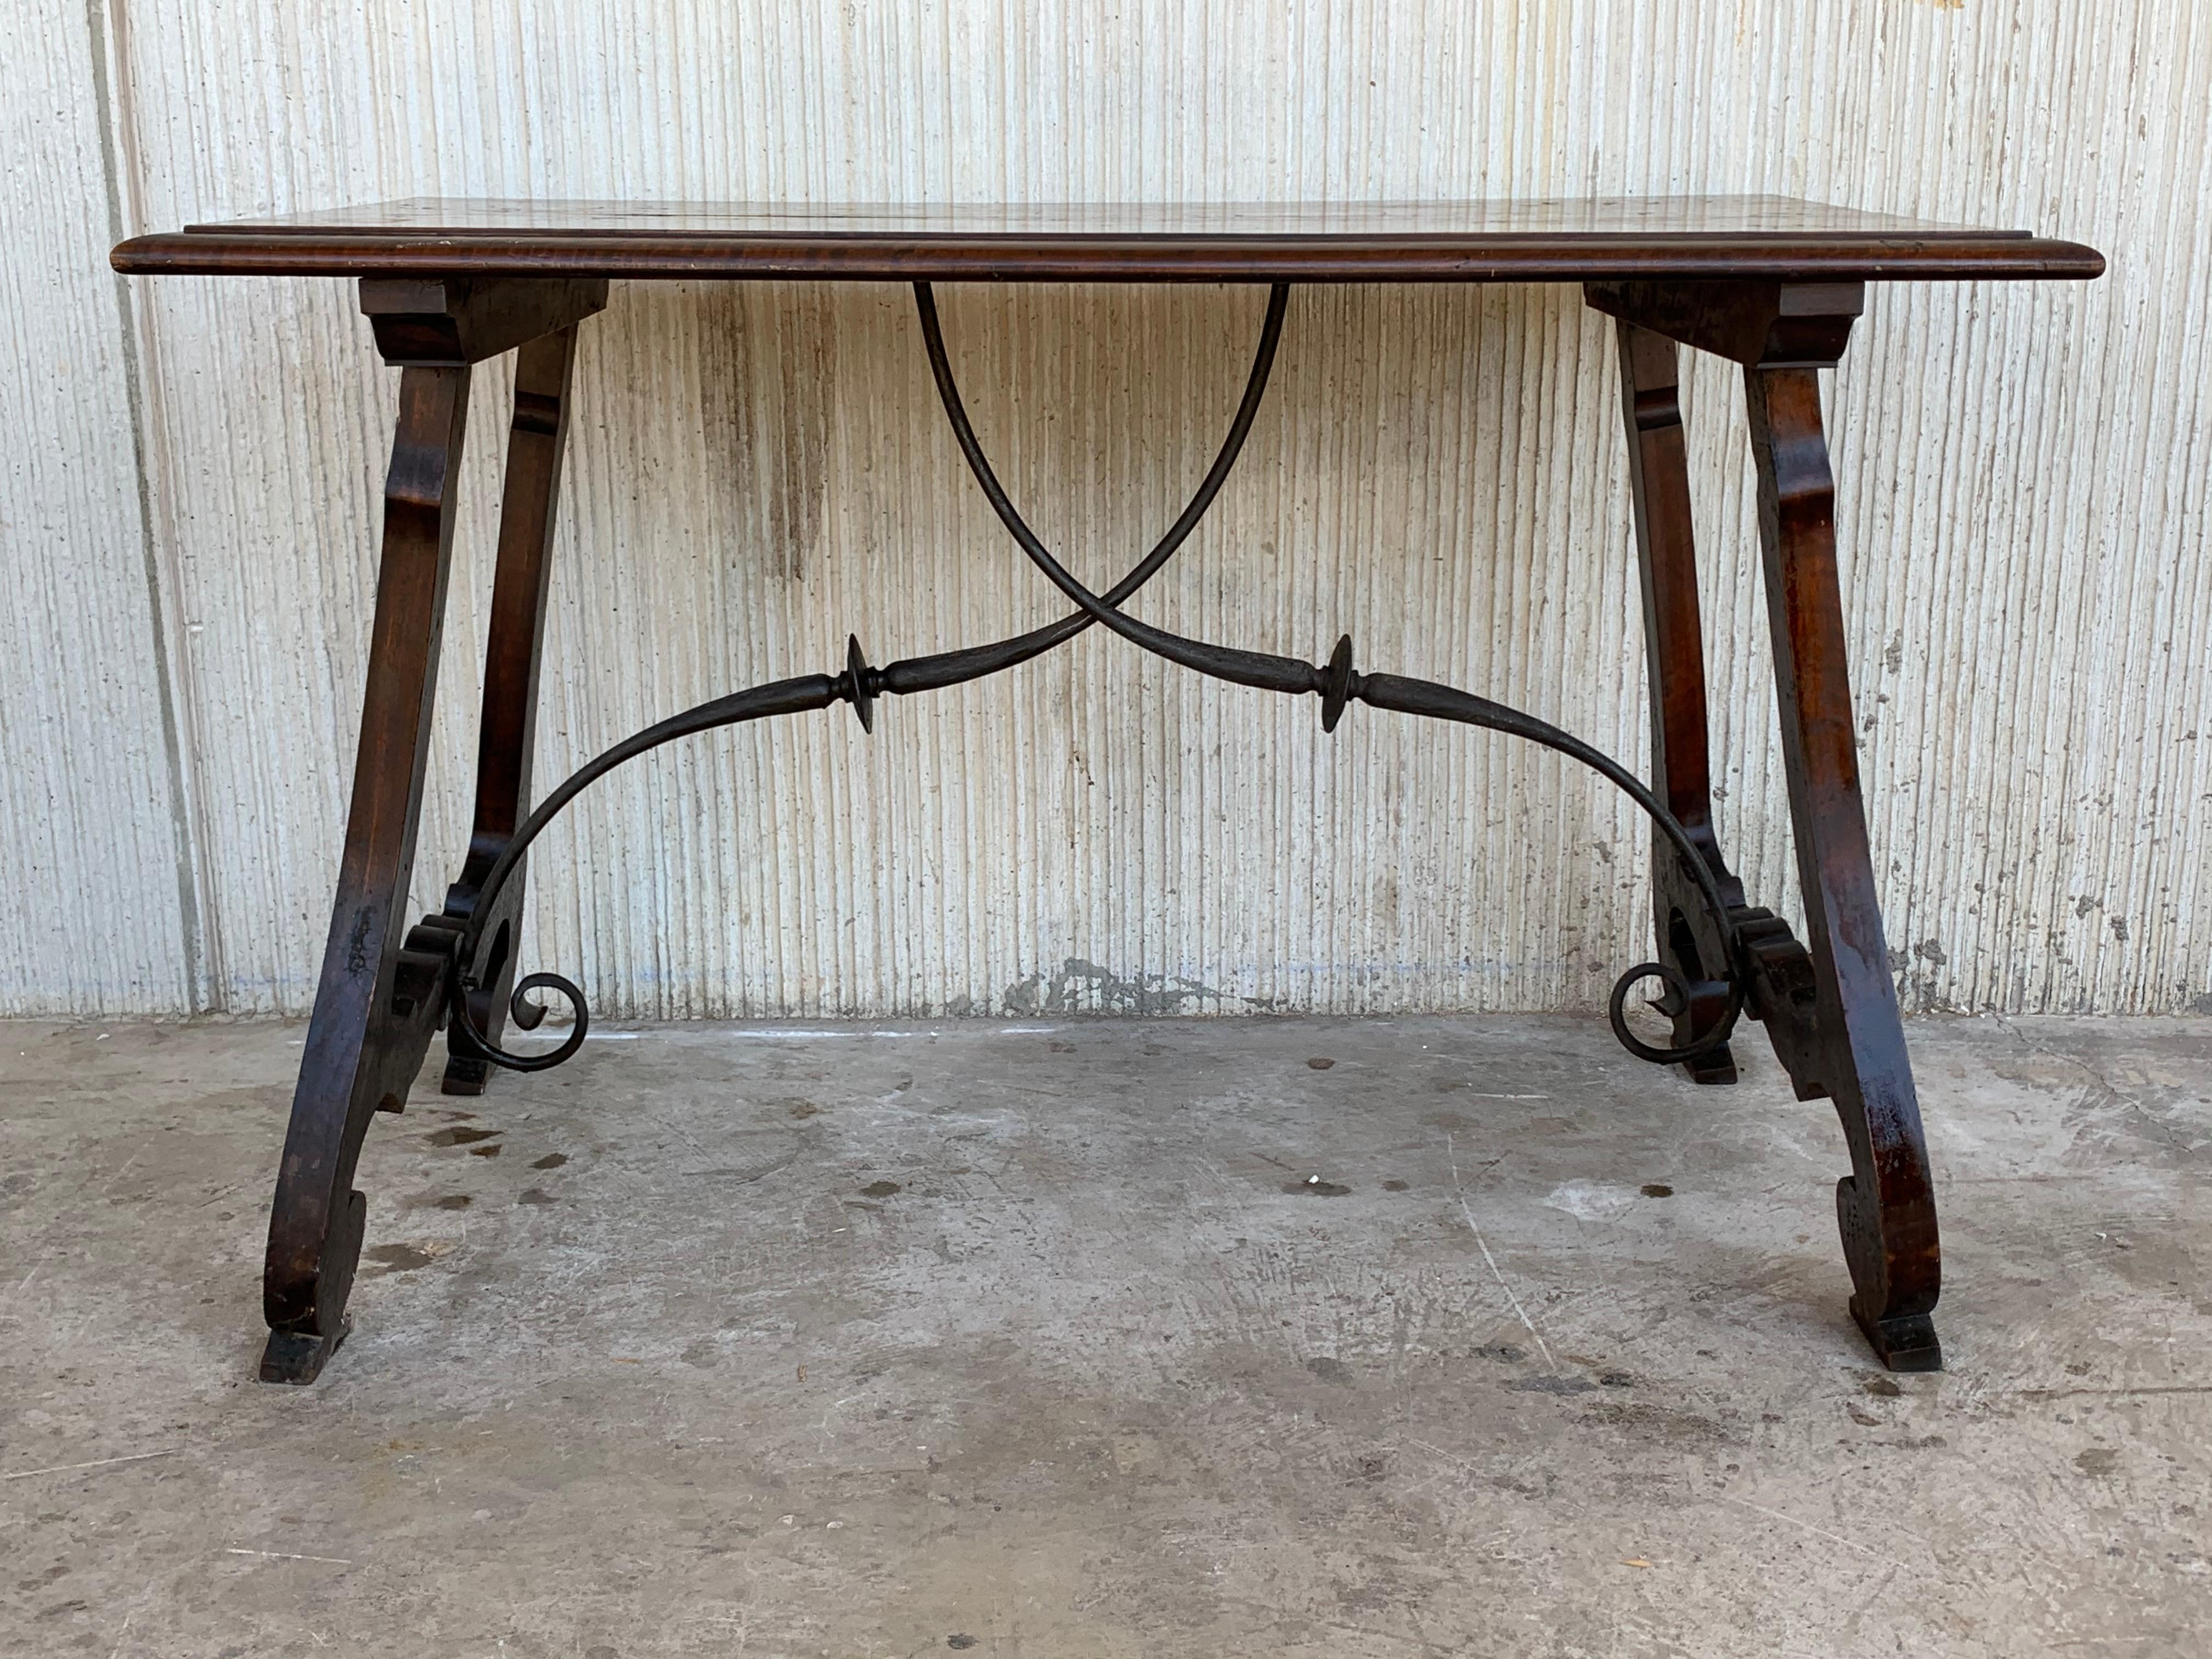 18th century Catalonian dining table with Baroque style lyre legs

This Spanish 18th century table features a rectangular top over an exquisite trestle type base with lyre shaped legs raised on carved volutes. Big thickness of the plateau and